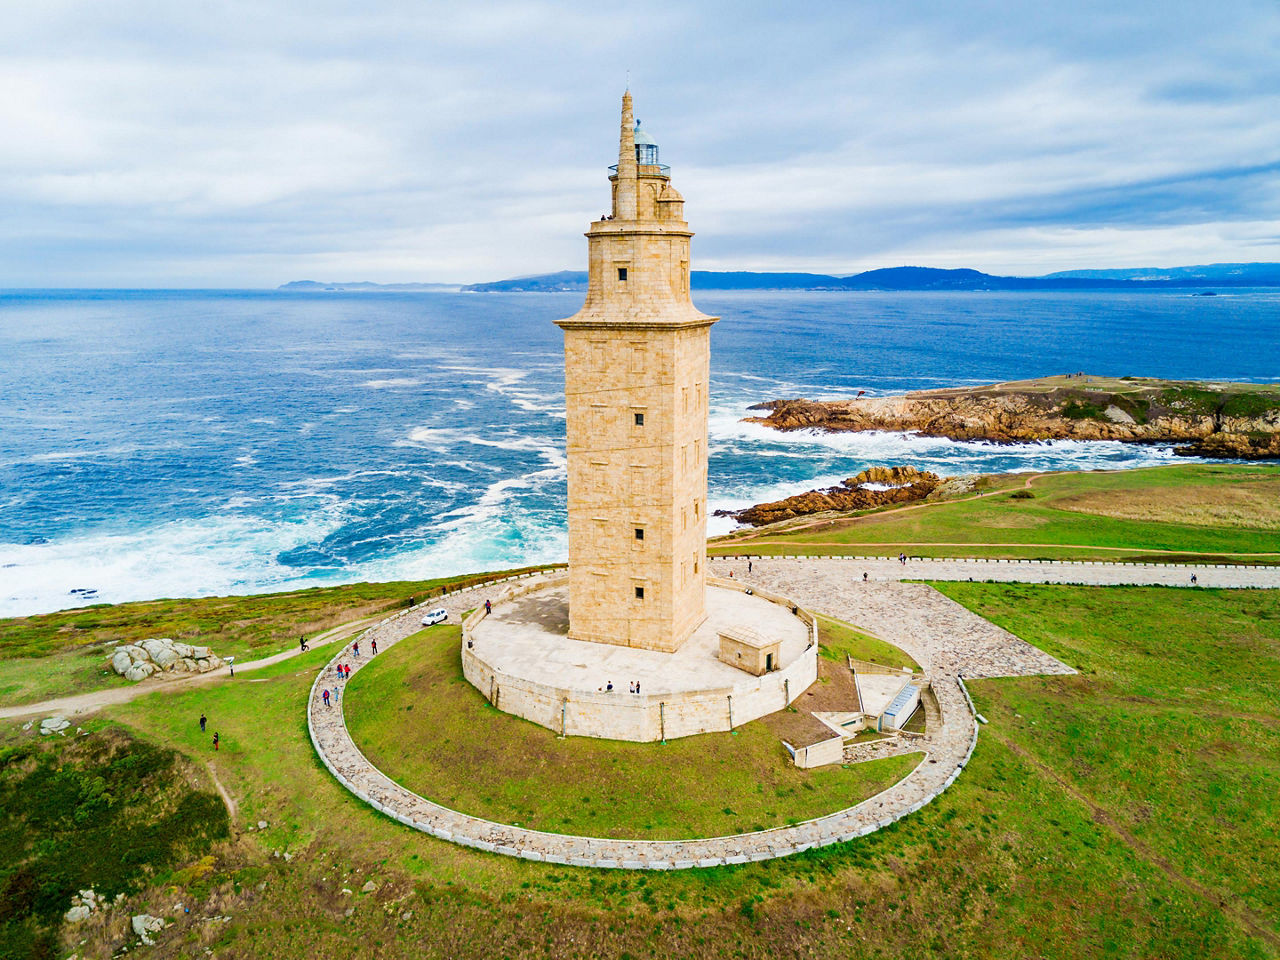 A close up view of the Tower of Hercules in La Coruna, Spain